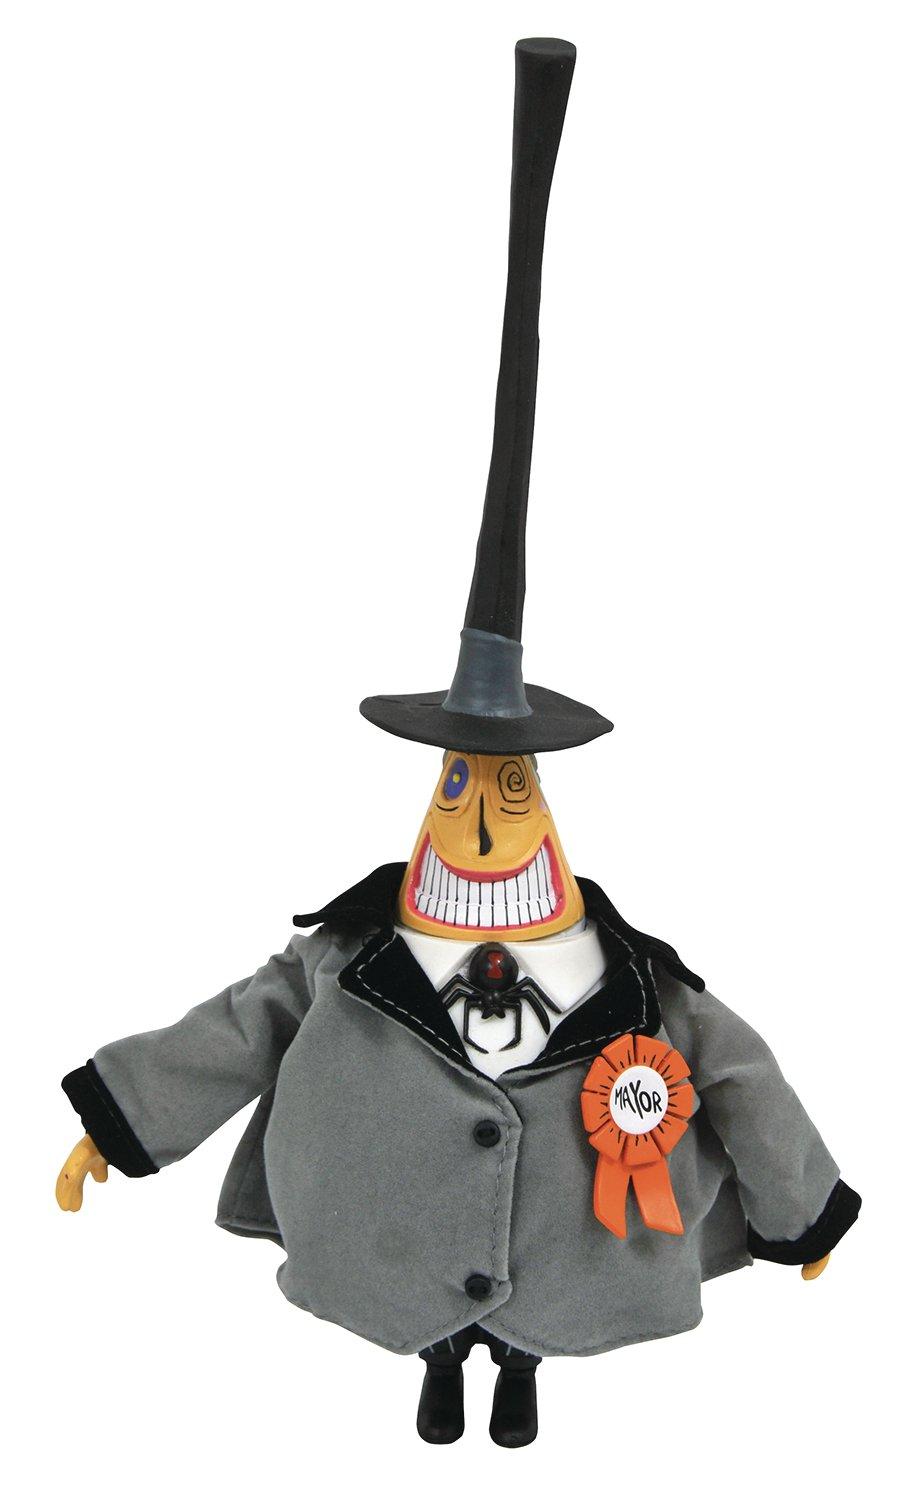 nightmare before christmas 25th anniversary action figures